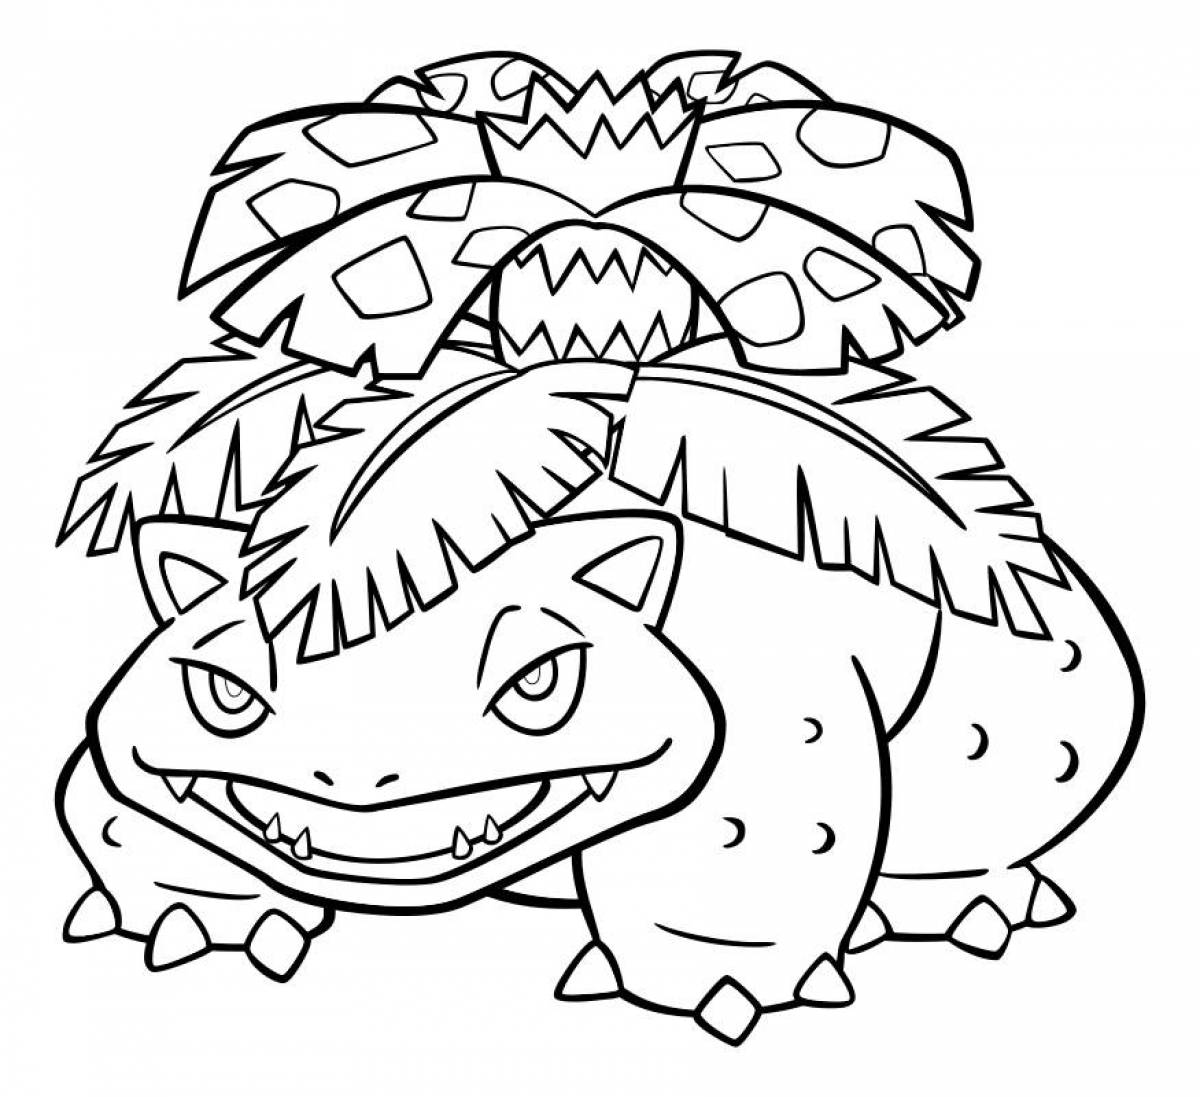 Middles bright coloring page